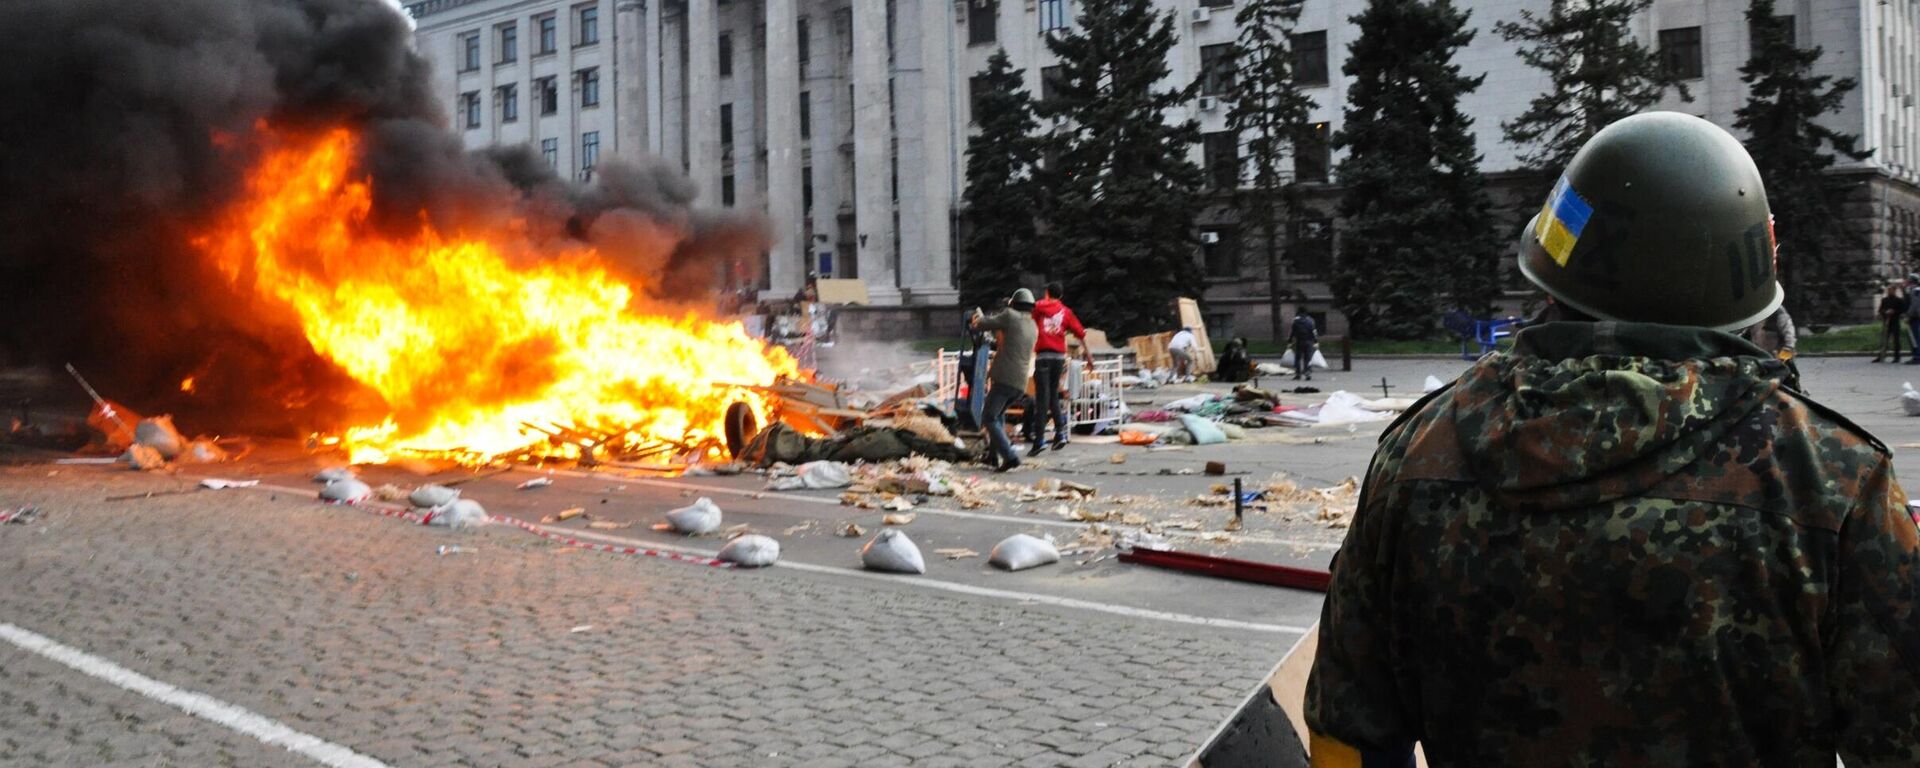 Mass unrest at the Odessa Trade Unions Building in Odessa on May 2, 2014, which culminated in the deaths of nearly 50 anti-Maidan activists - most of them burning alive in the building. - Sputnik International, 1920, 02.05.2024